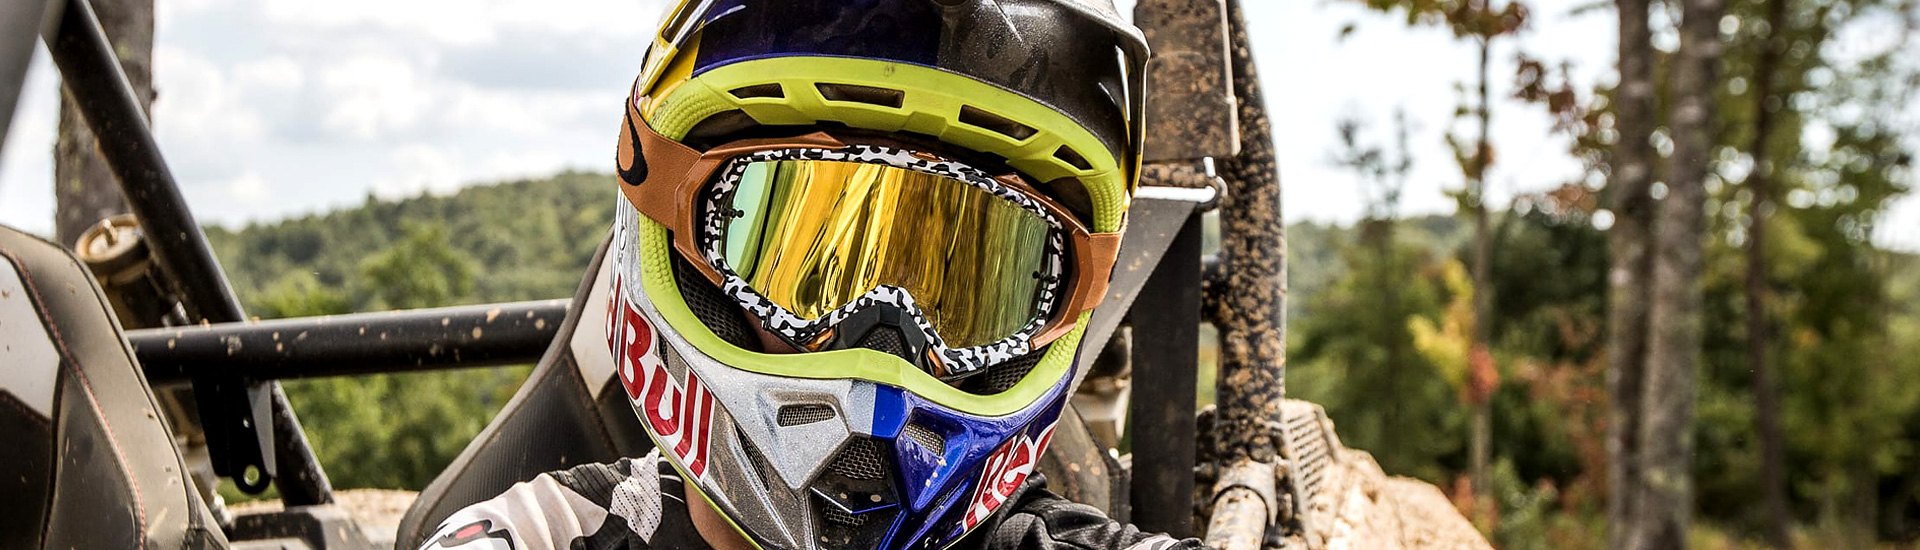 Powersports Helmet Certifications | What are the Differences among DOT, ECE, SHARP, & SNELL?